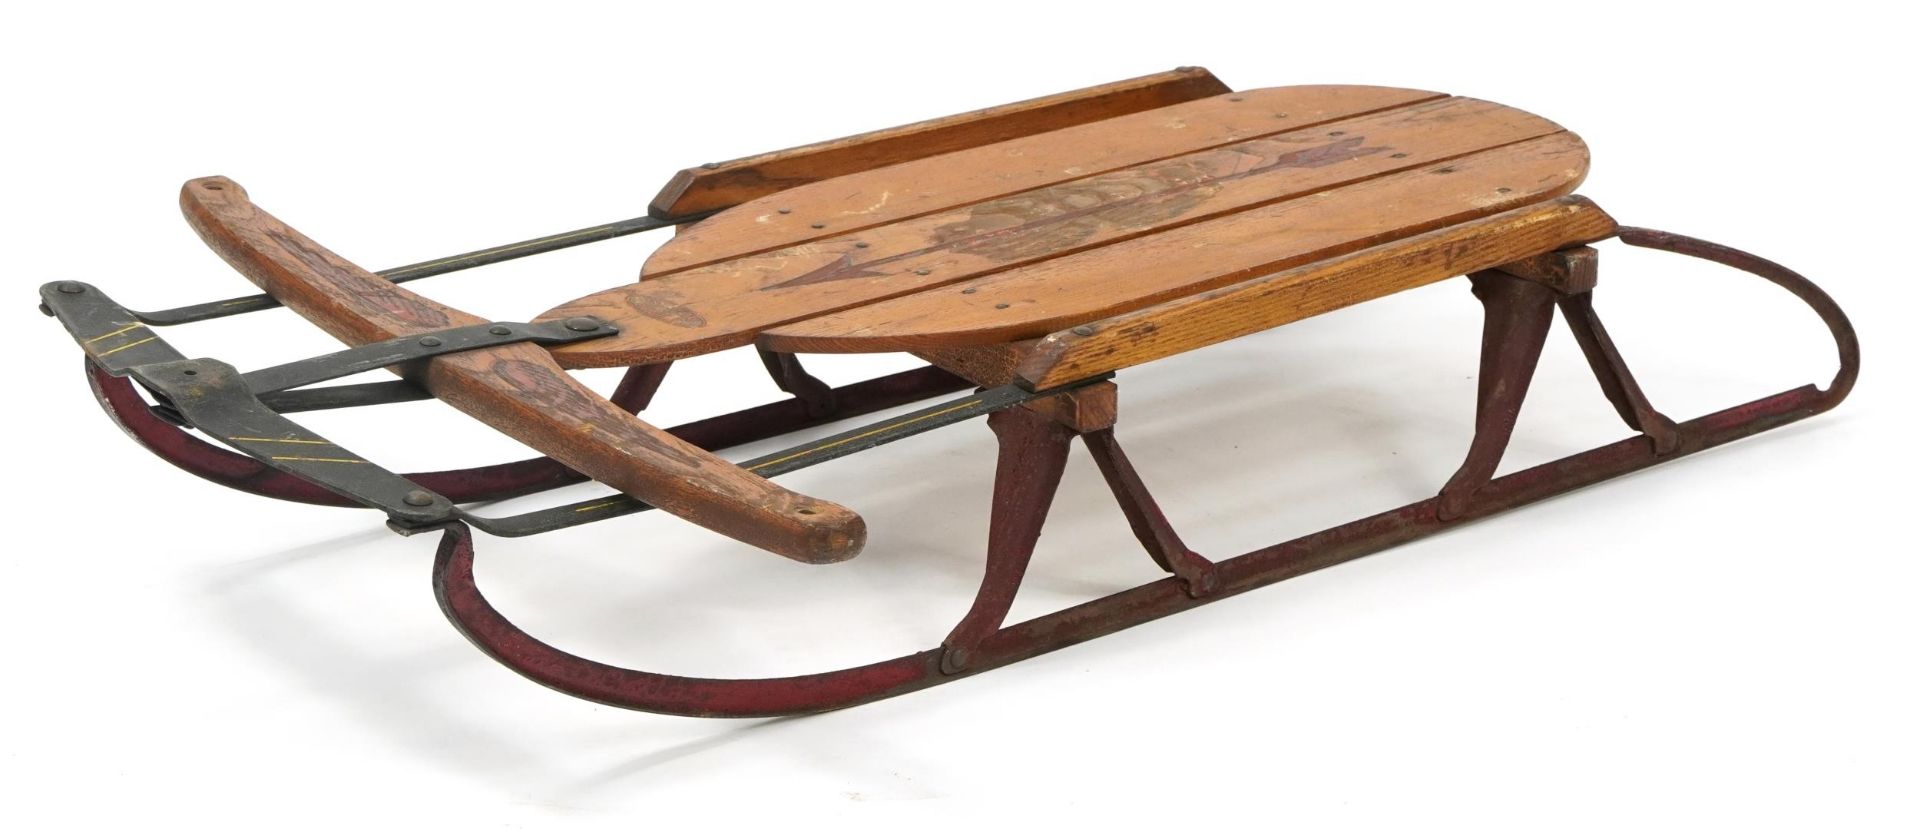 Vintage Flexible Flyer wooden and metal sled, 100cm in length